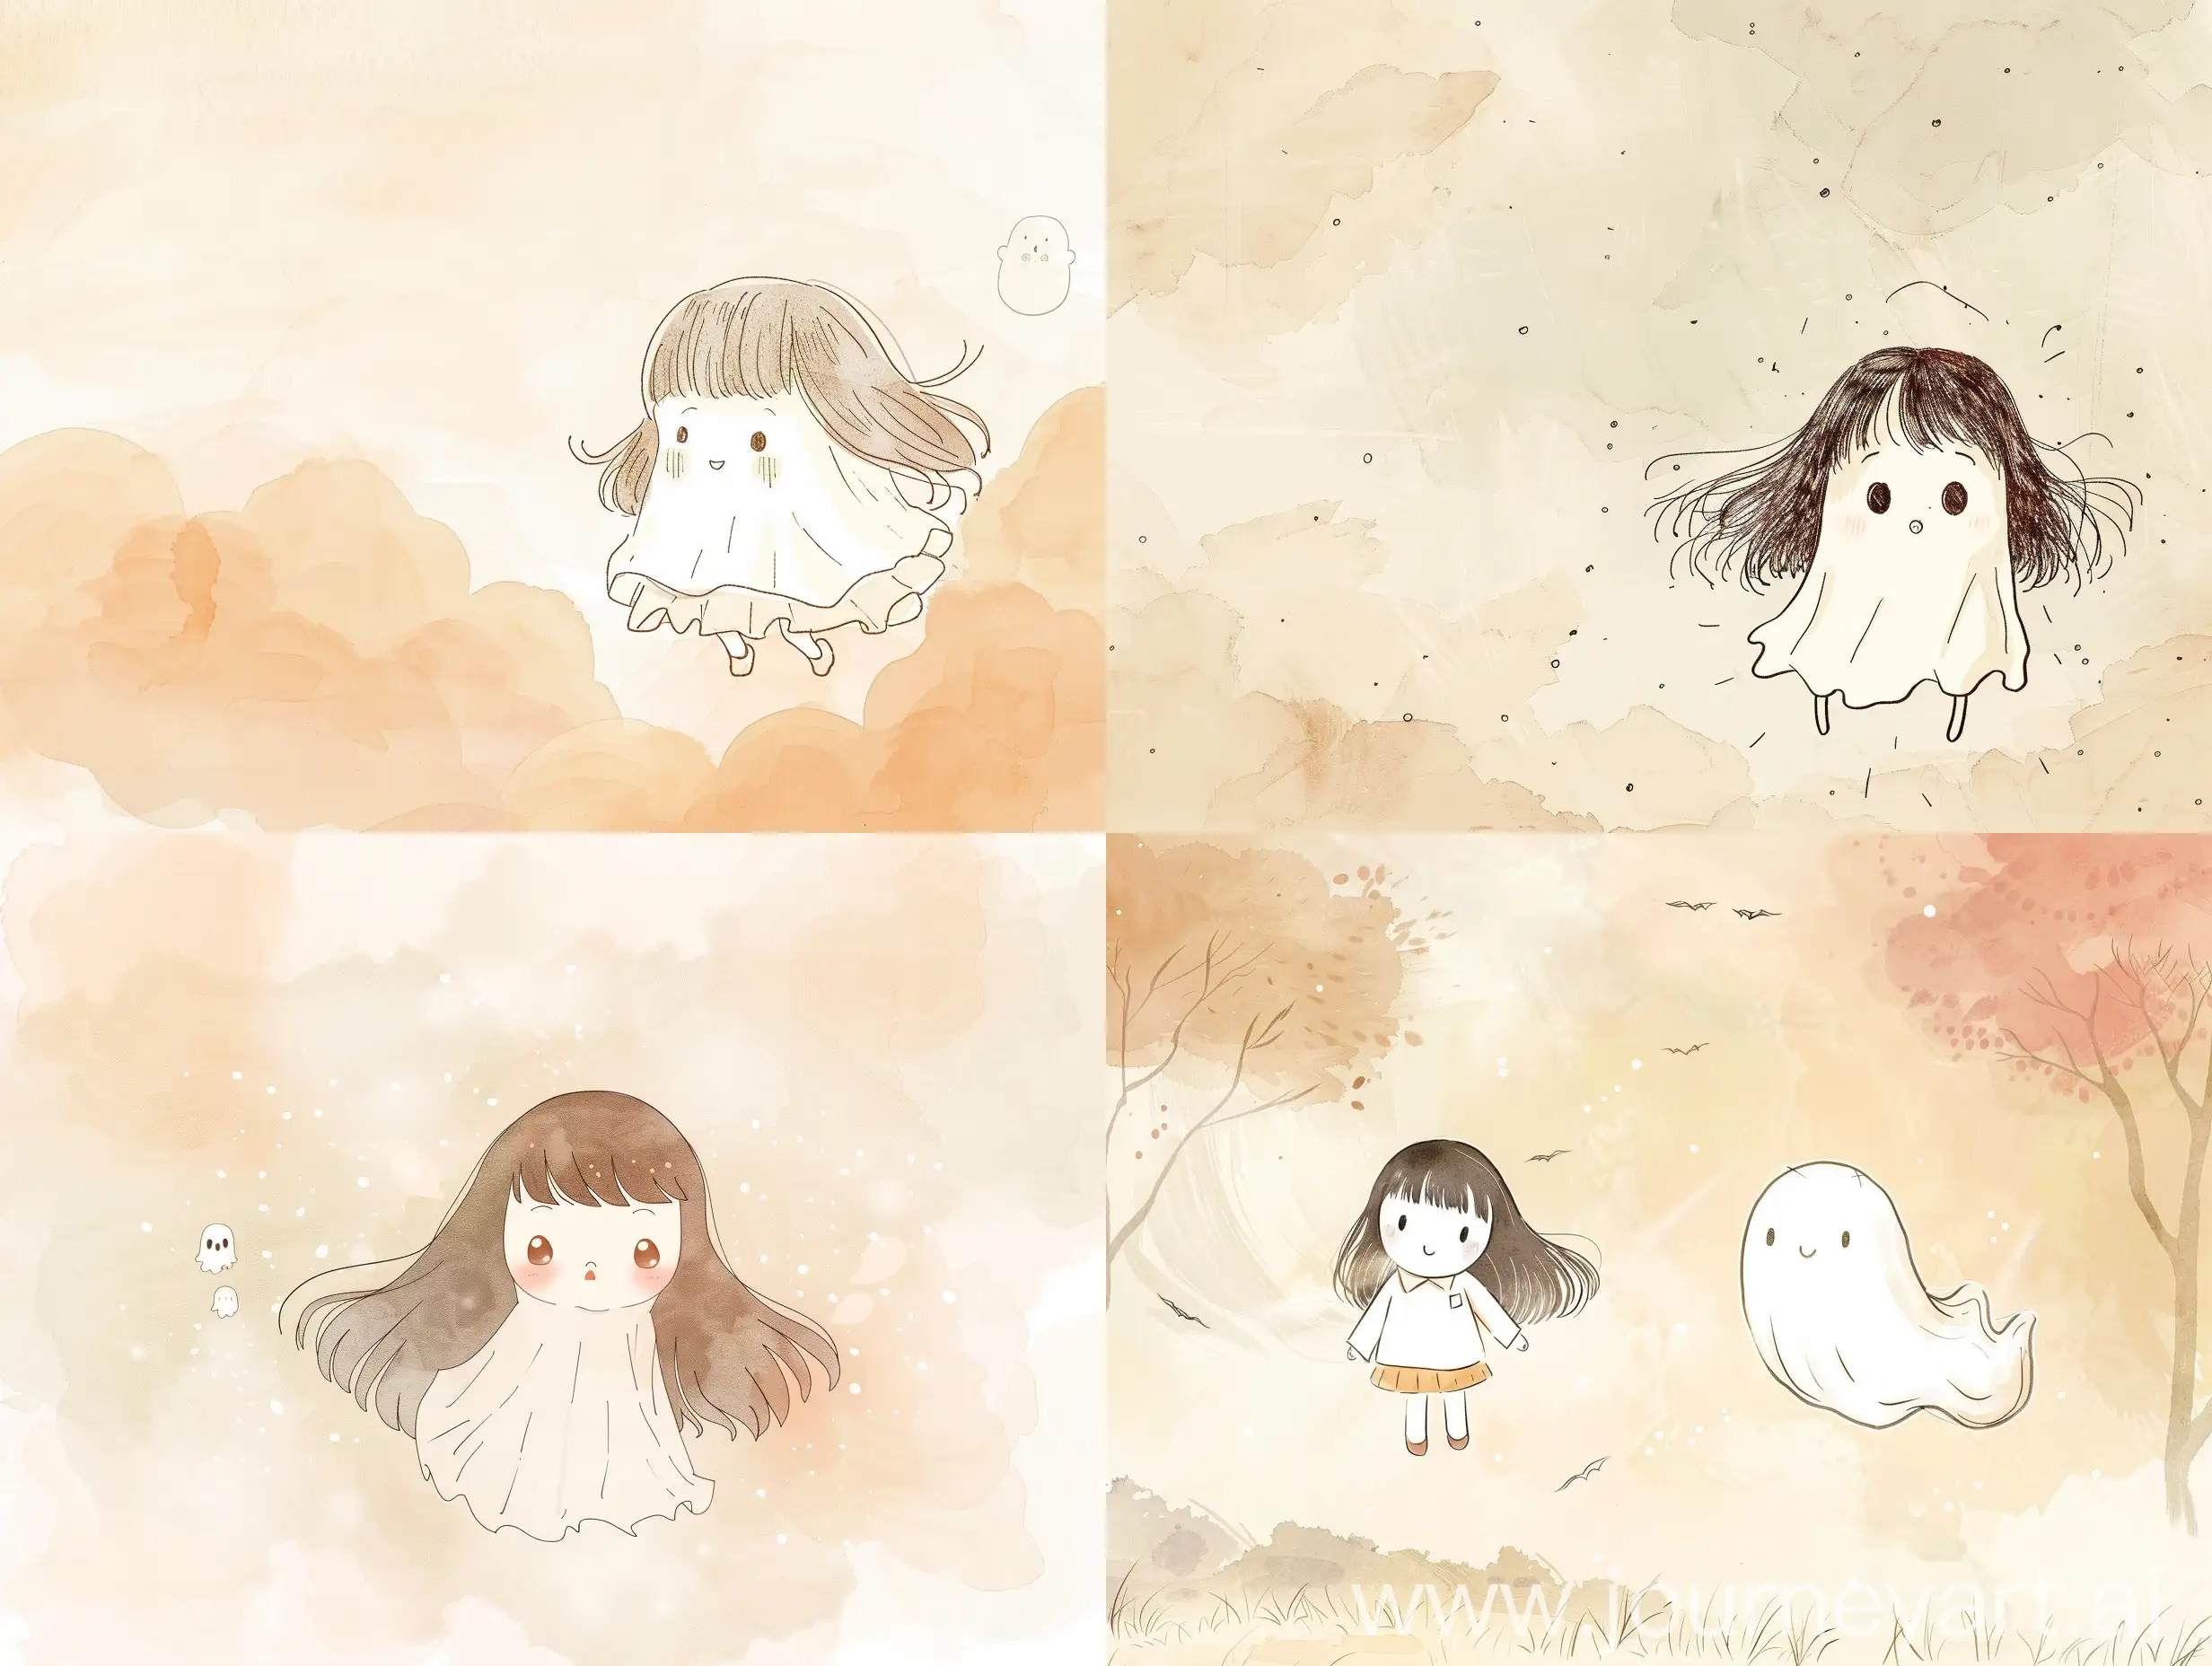 A cute Japanese girl, she is a ghost, floating in the air, bringing back memories of first love and being shy and blushing, looking cute, cartoon anime style, strong lines, spooky background,with neutral colors and low color saturation, in a watercolor style, with a beige illustration, a hand drawn doodle simple minimalistic vector art drawing, like a children's book illustration, with a flat design using solid shapes and soft muted tones with no outlines.in a watercolor style, with a beige illustration, a hand drawn doodle simple minimalistic vector art drawing, like a children's book illustration, with a flat design using solid shapes and soft muted tones with no outlines.